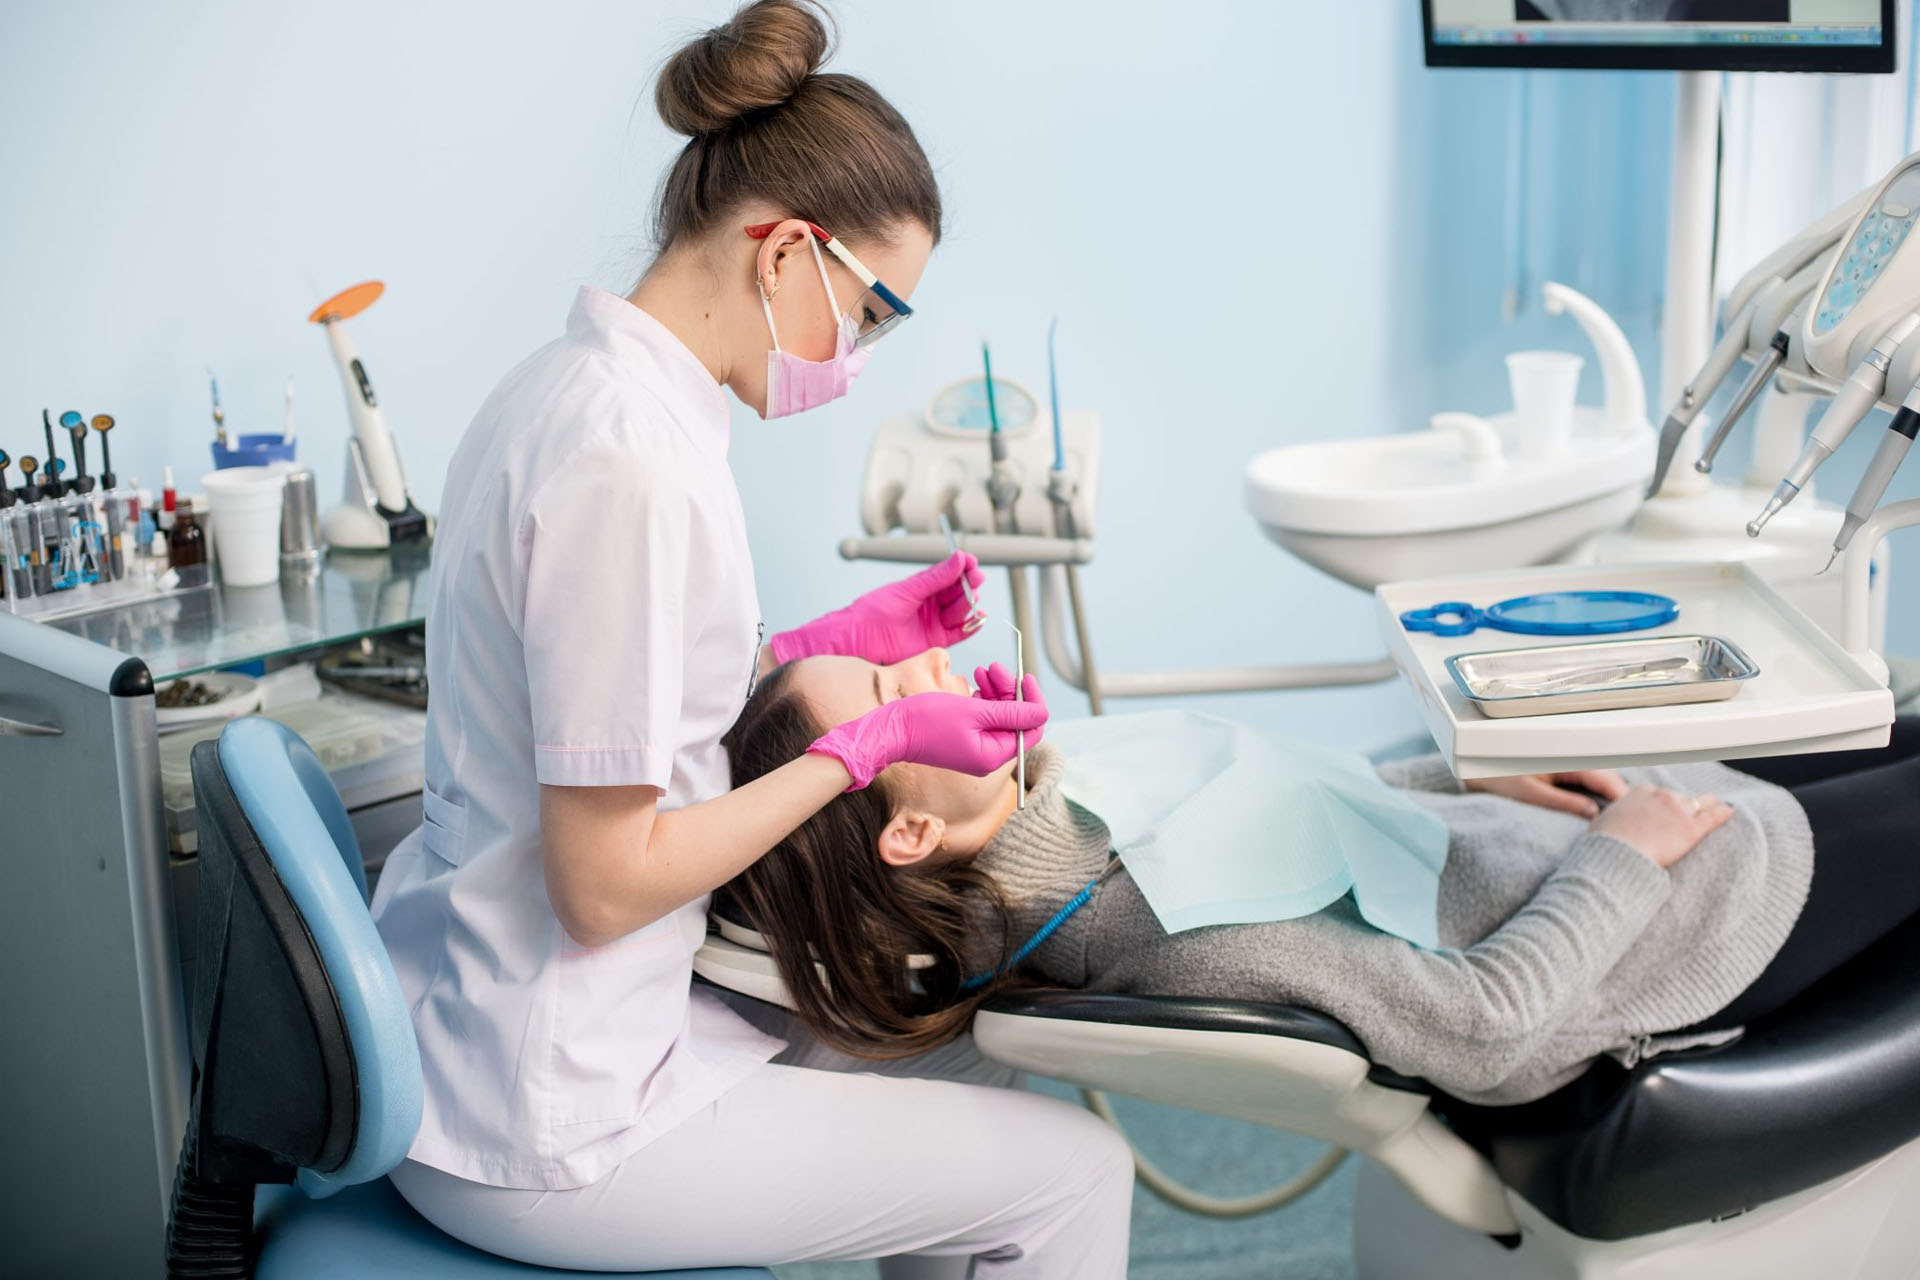 Can Dental Hygienists Be Independent Contractors?